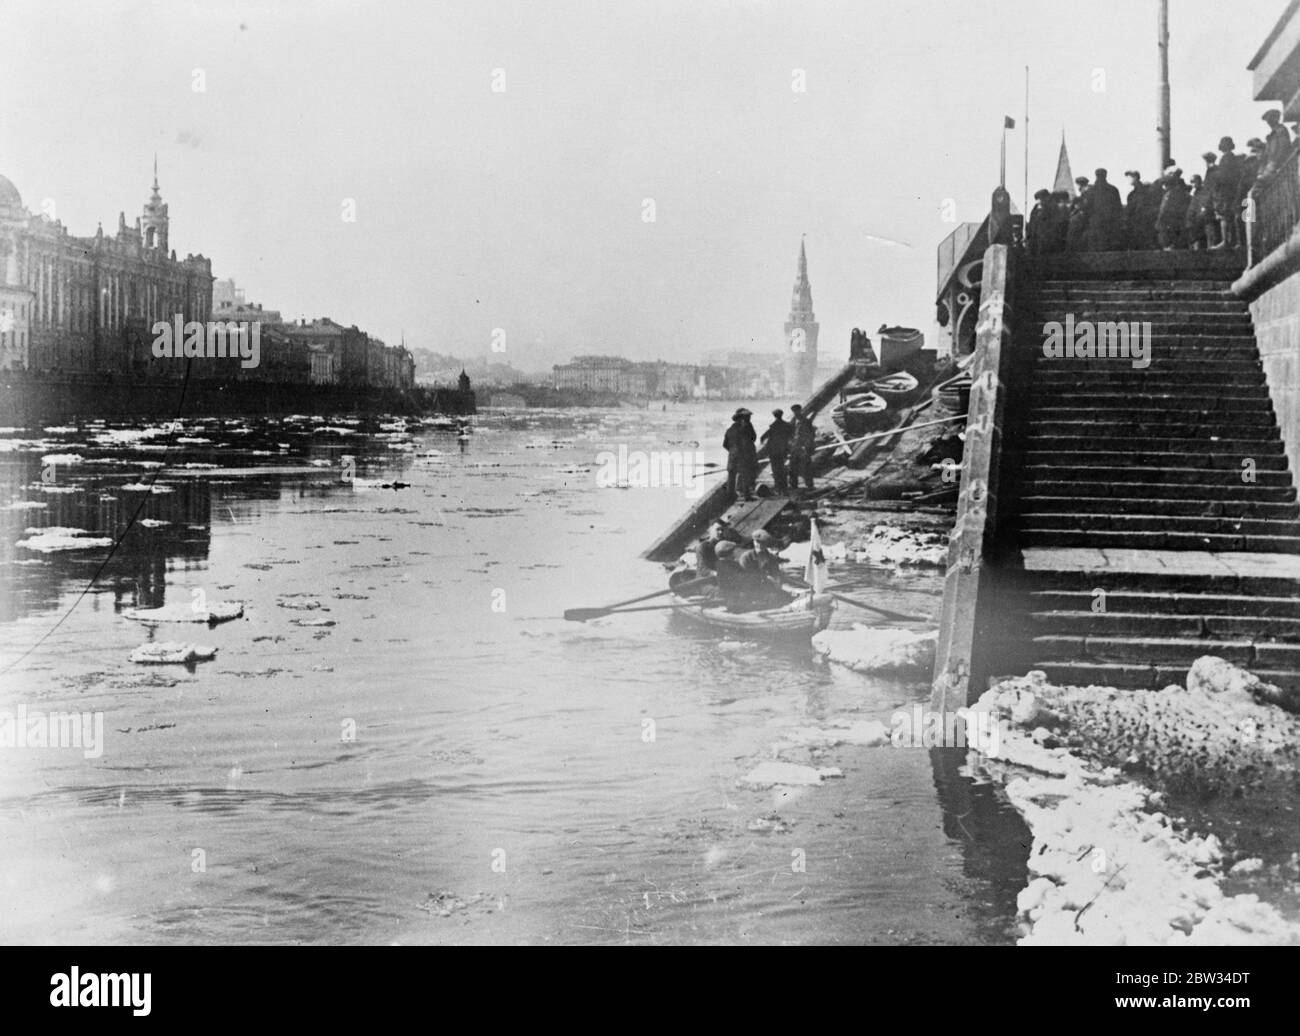 The ice begins to break in Moscow . Day and night guard in case of flooding . The ice in the river Moskva , has broken and the embankments are guarded day and night to warn inhabitants against the danger of flooding , caused by the swelling of the rivers by the melting ice . Melting ice flowing down the river Moskva in Moscow . 26 April 1932 Stock Photo